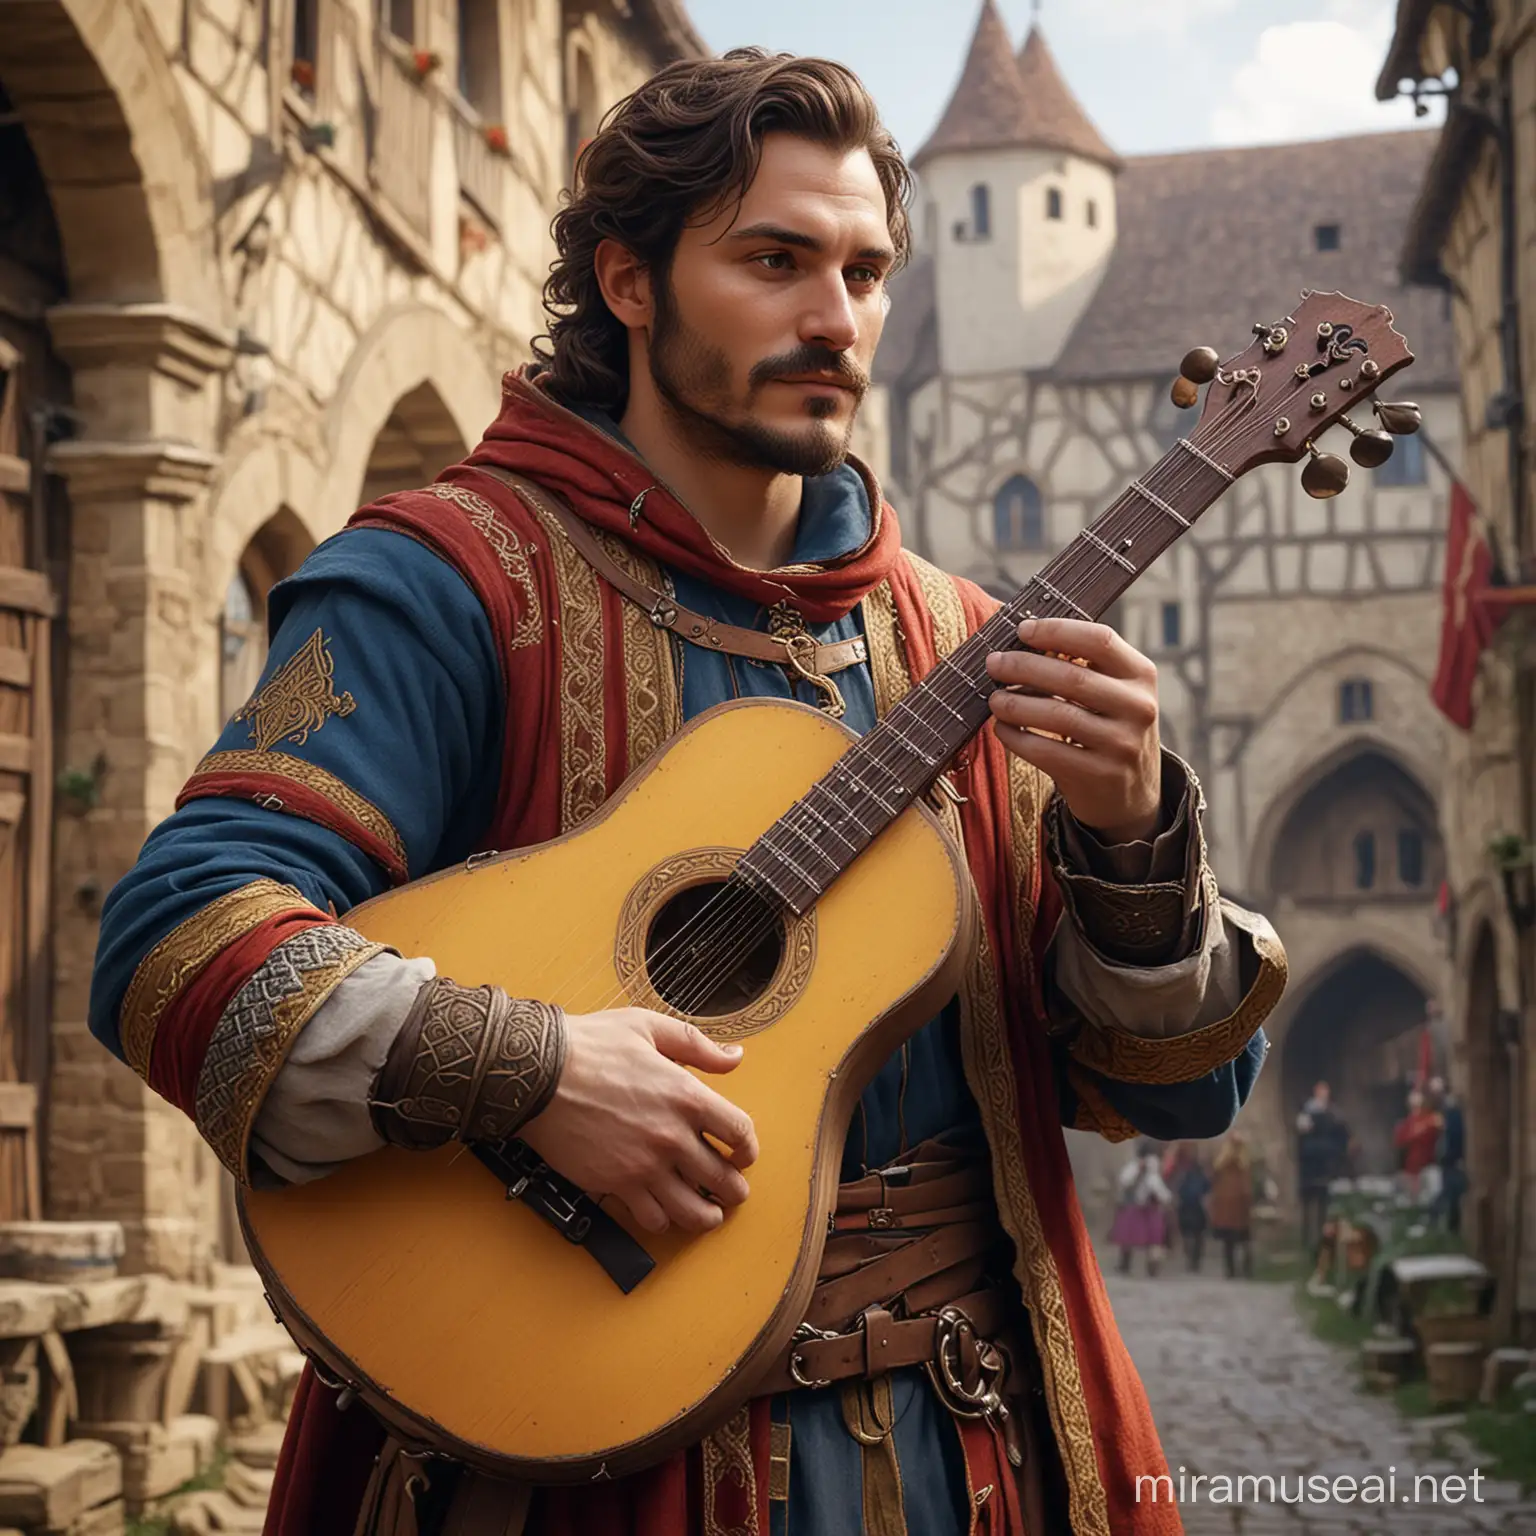 Colorful Medieval Bard Performing in a Vibrant Fantasy World